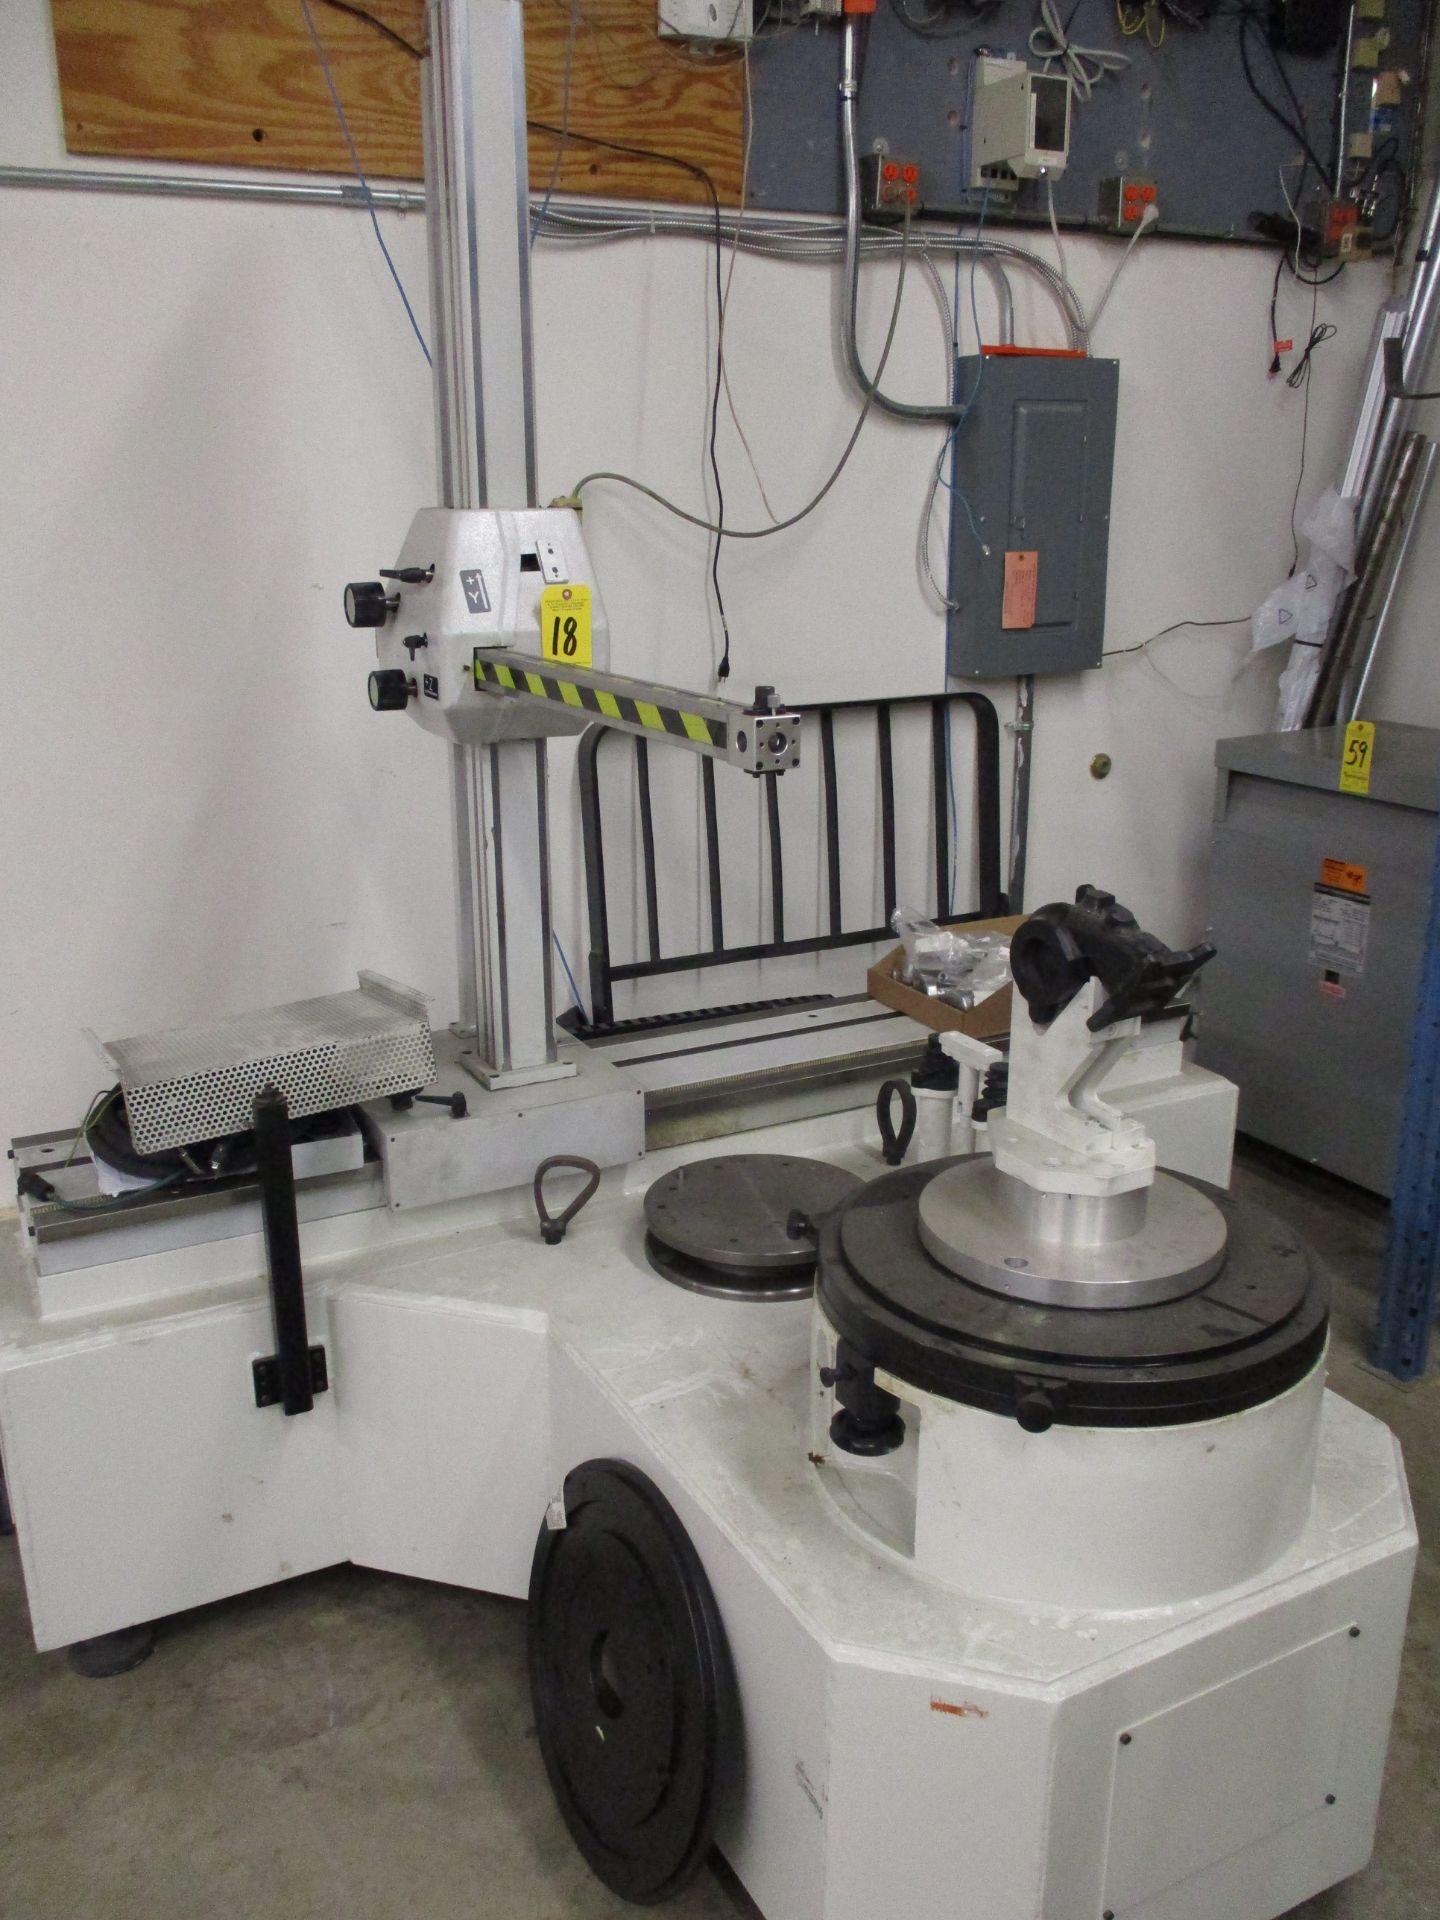 Maus Grinding Machine Programming Bench, Note: Machine Frame Only - Image 2 of 6